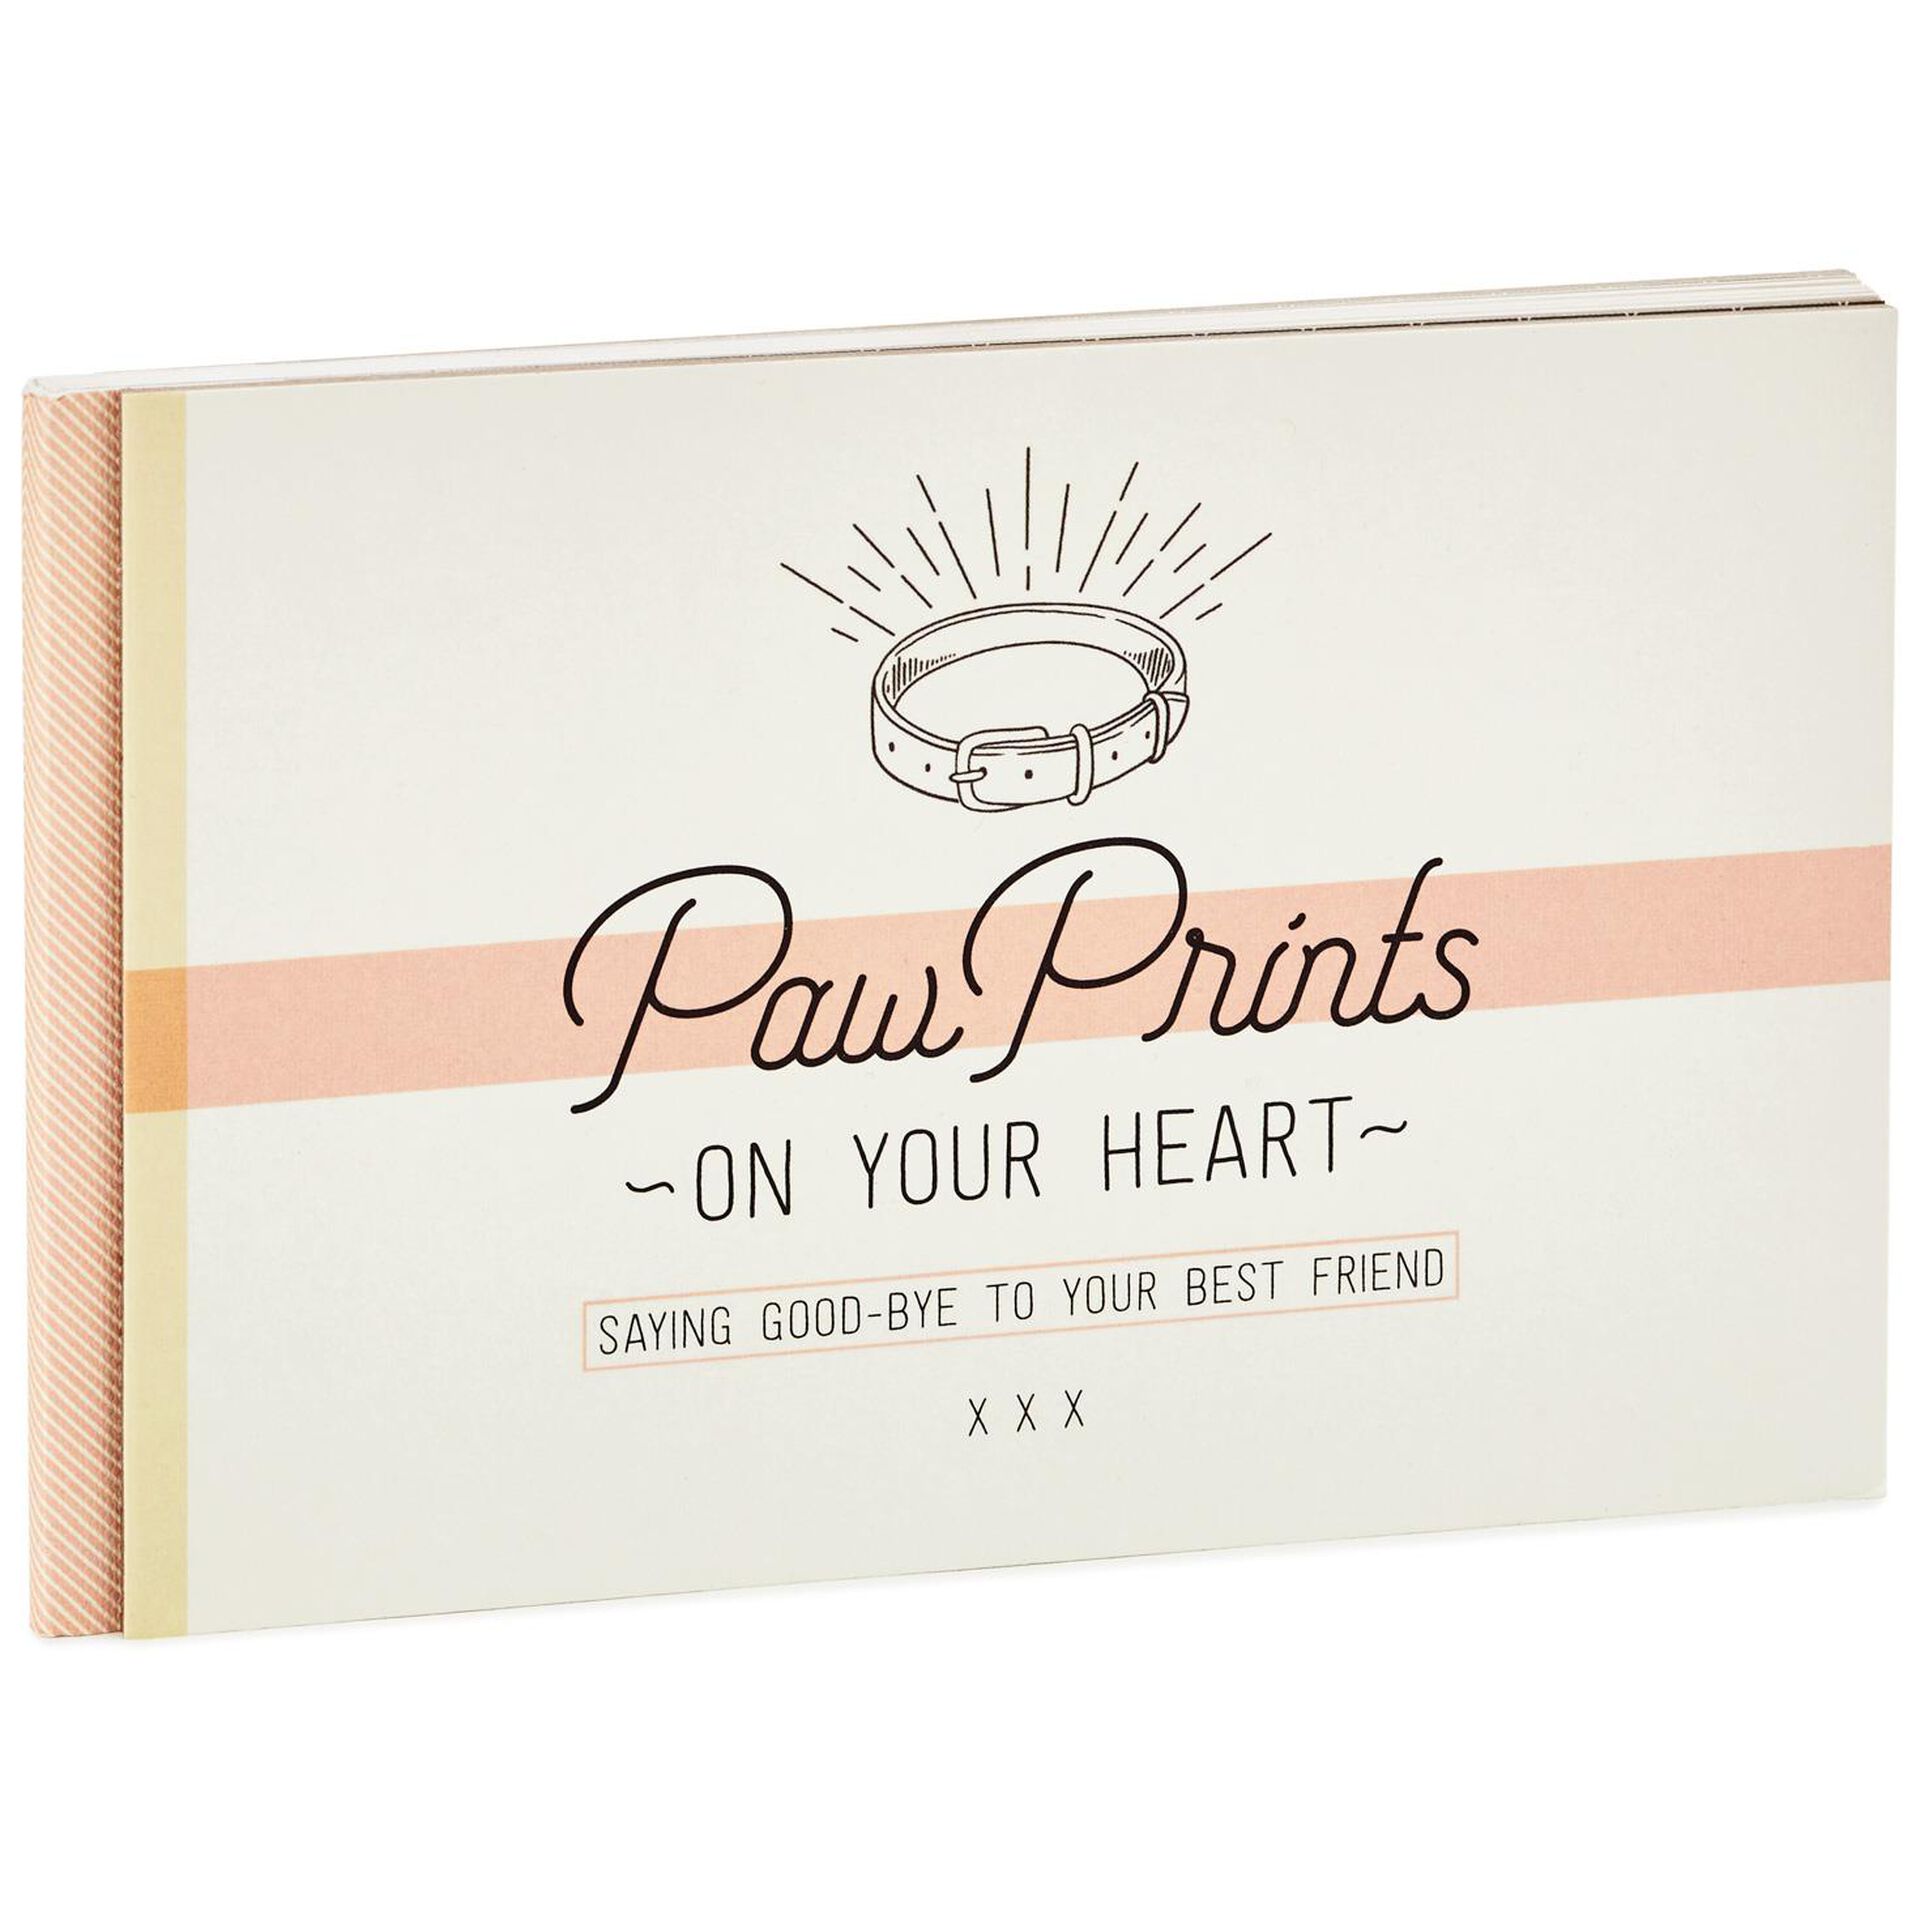 Paw Prints Your Heart: Saying Good-bye Your Best Friend Gift Books -